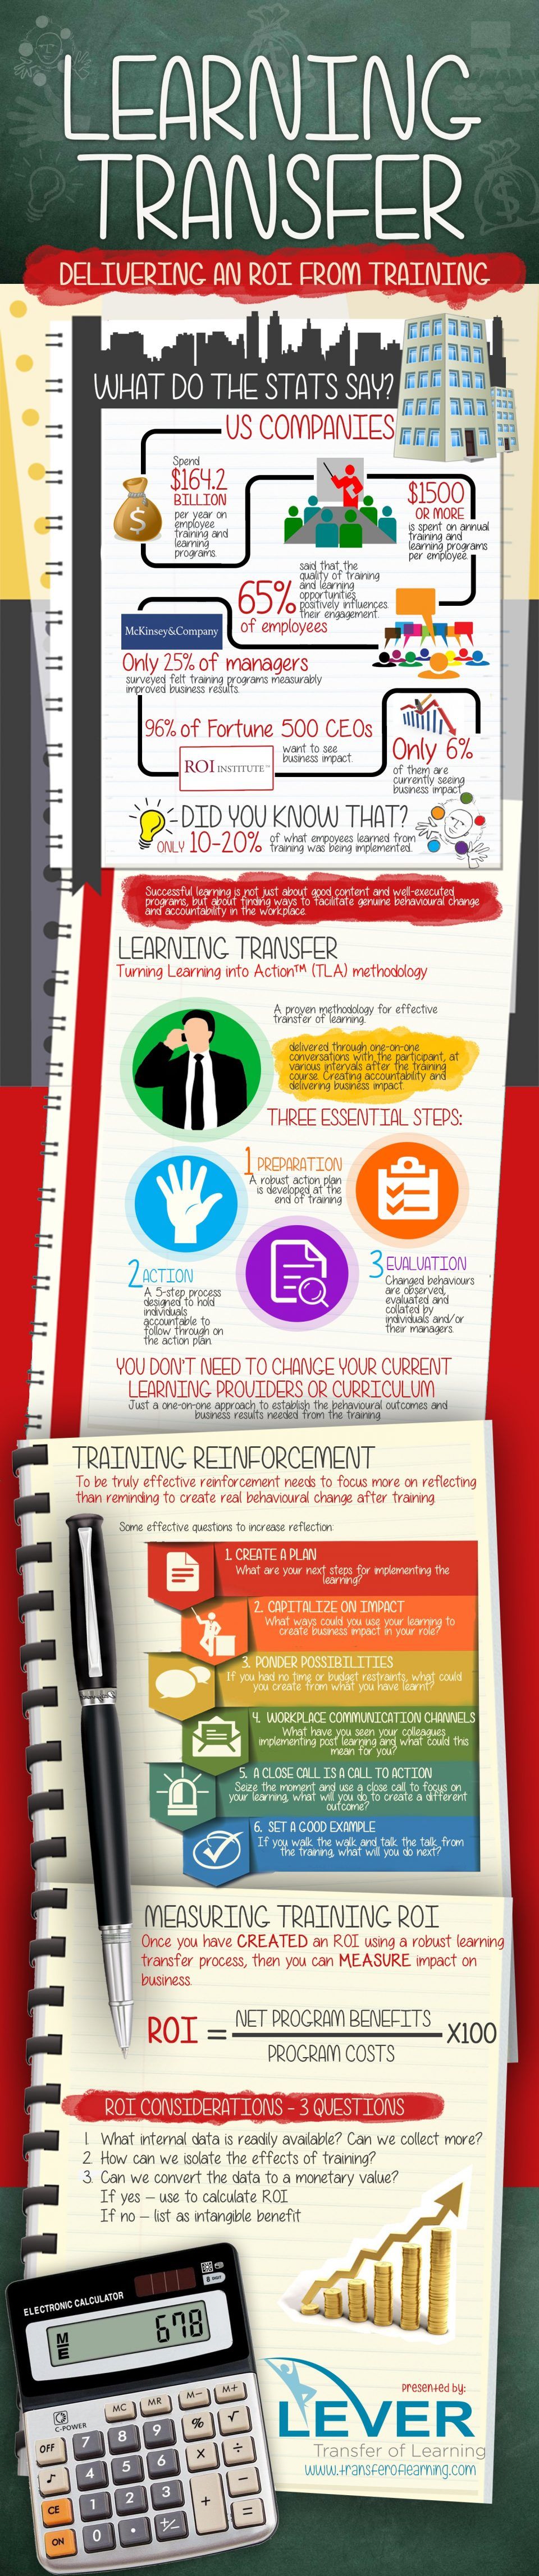 ROI from Training with Learning Transfer Infographic